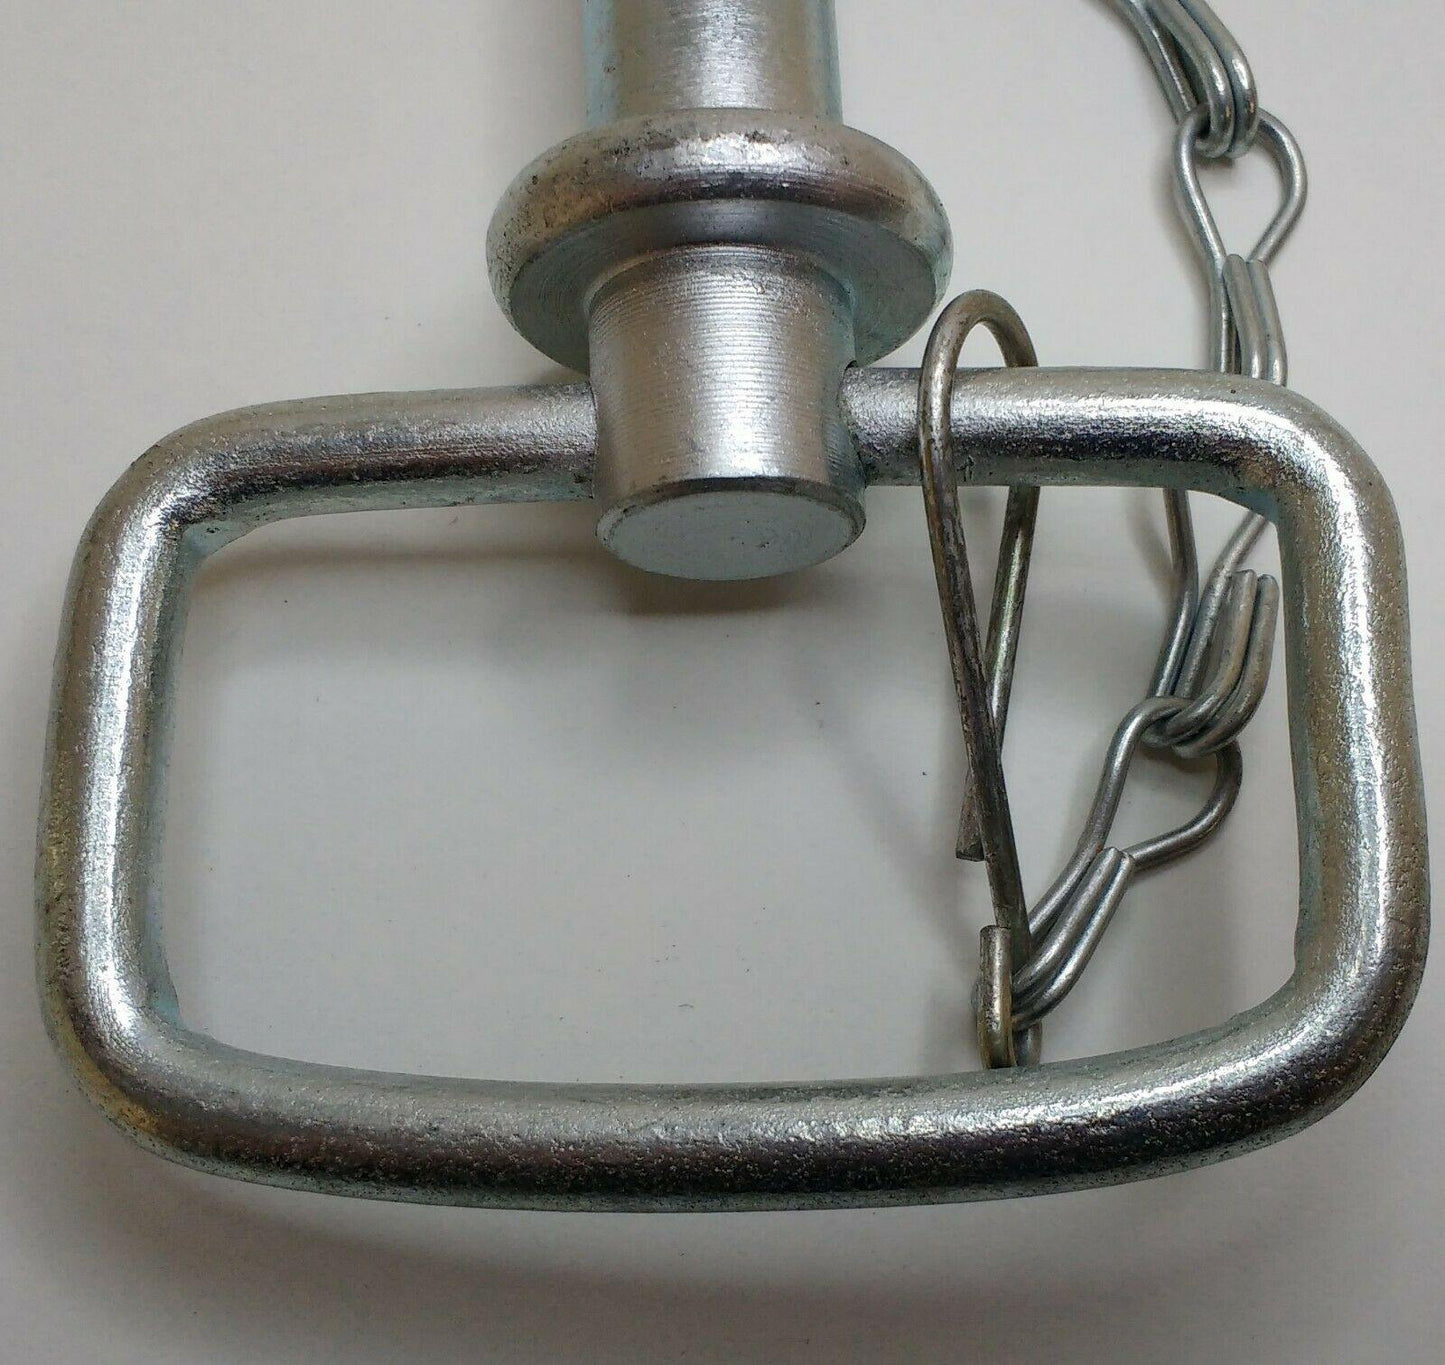 Drop Handle Tow Hitch Pin With Linch Pin & Chain 16Mm X 165Mm Maypole Mp44341B - Mid-Ulster Rotating Electrics Ltd